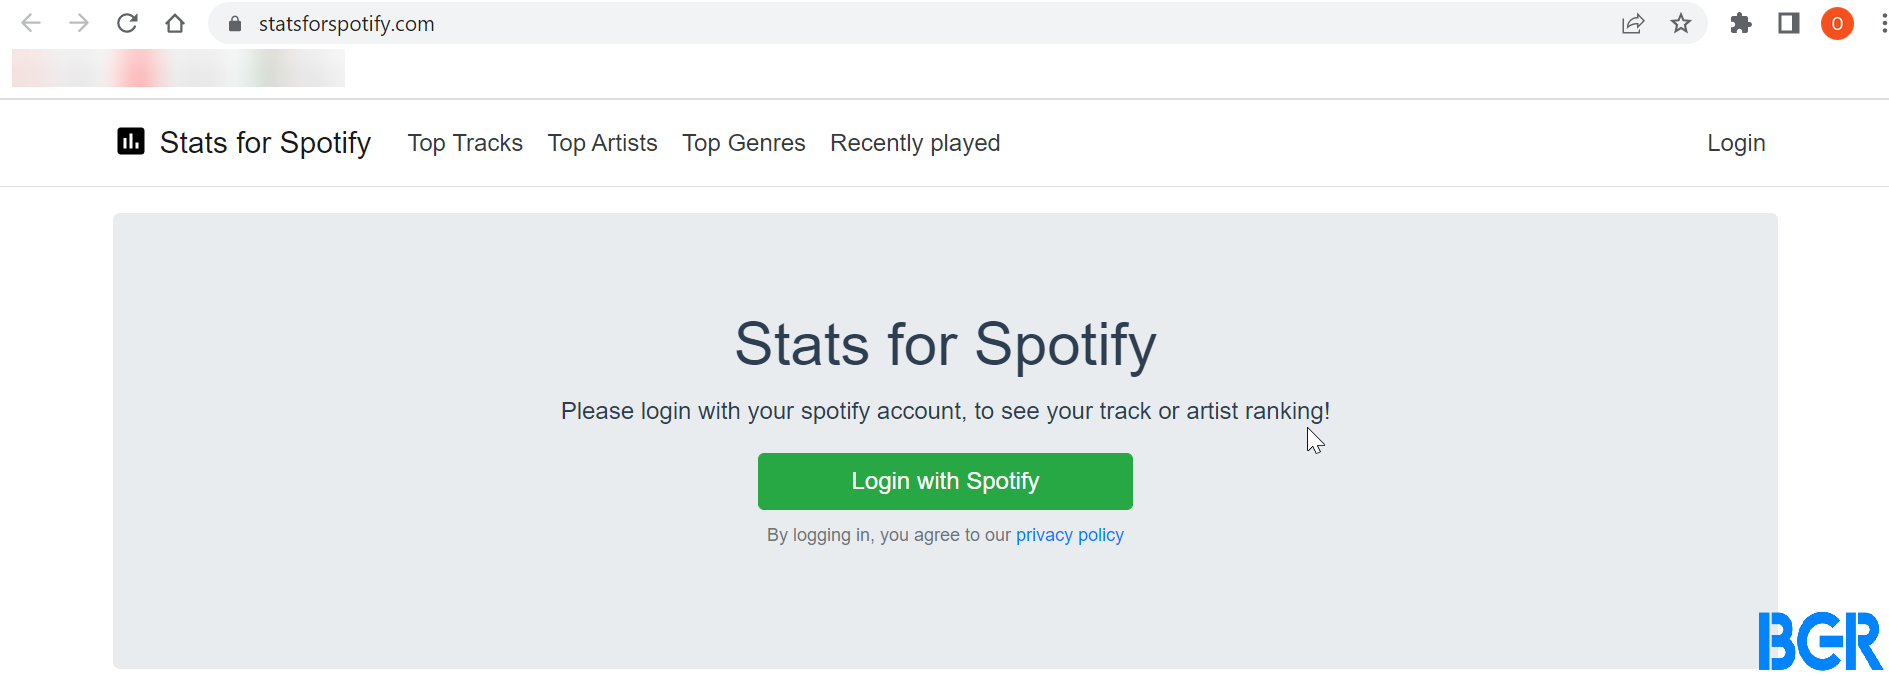 Stats for Spotify website